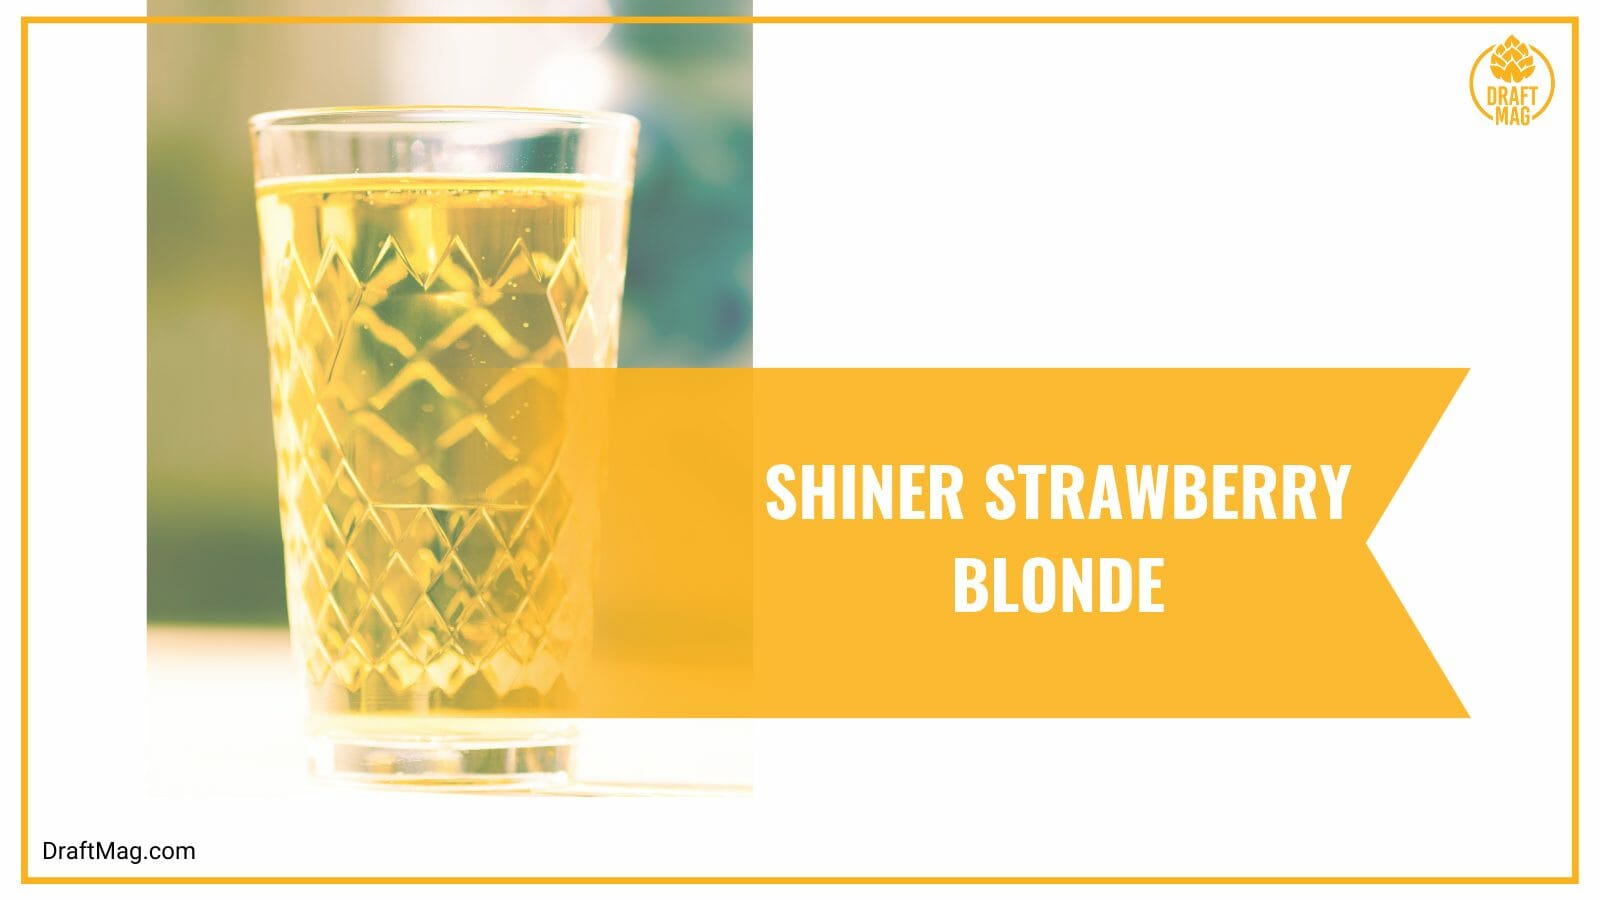 Shiner Strawberry Blonde Guide